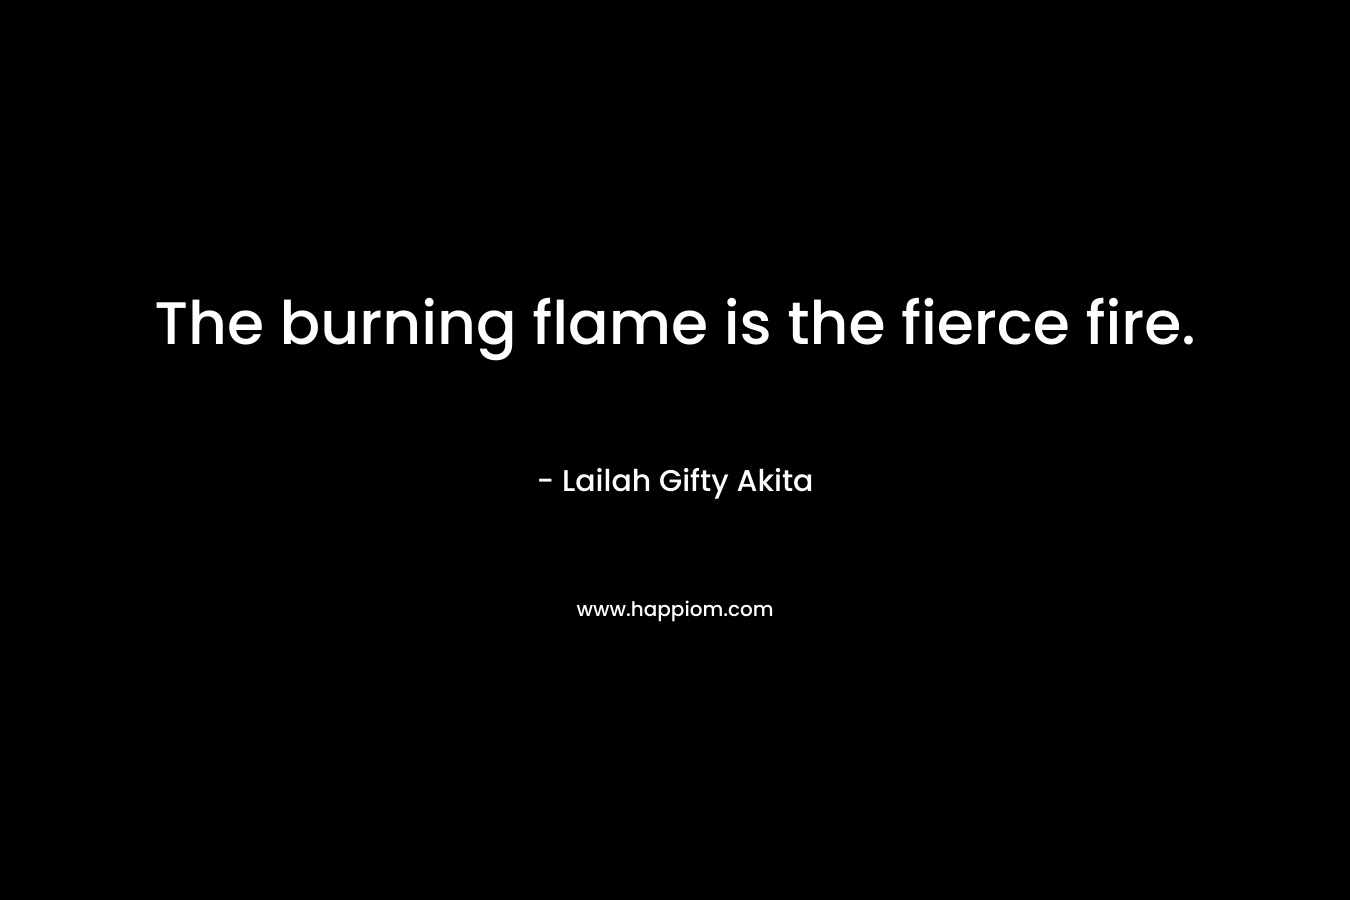 The burning flame is the fierce fire.